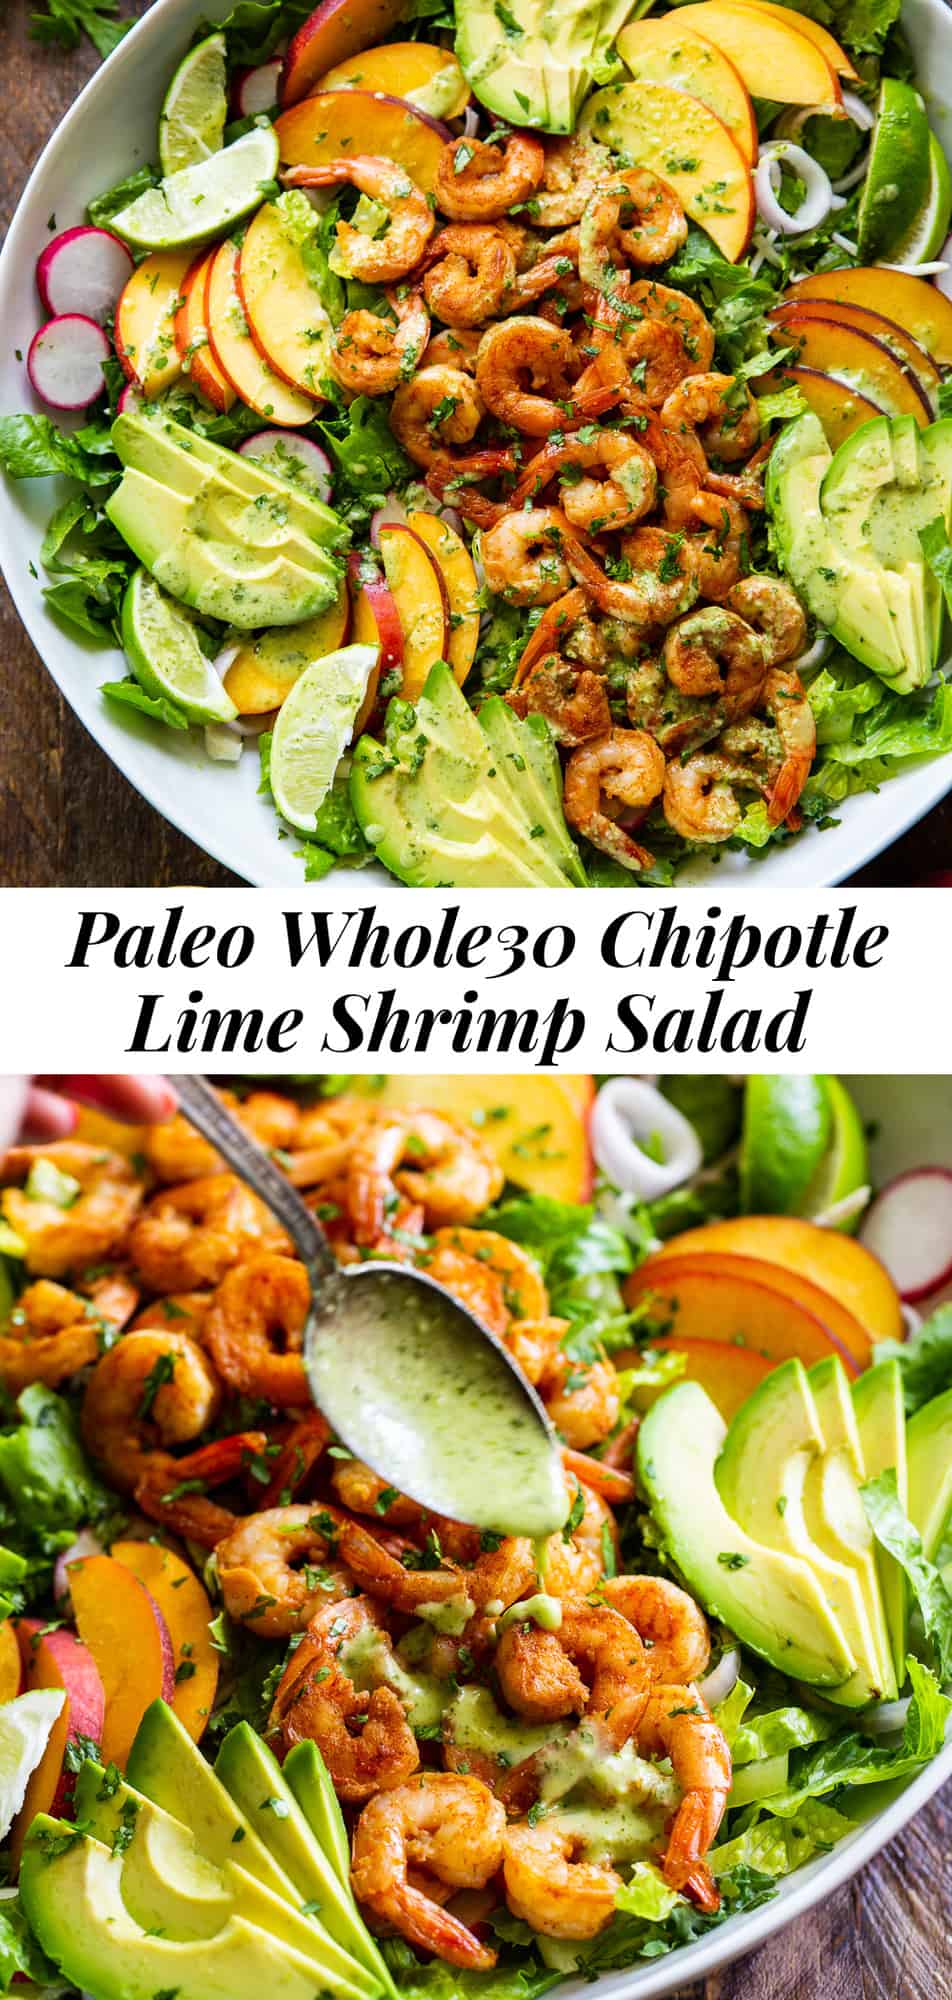 This healthy salad has tons of savory and sweet flavors plus spice! Spicy chipotle shrimp over a fresh summer salad with the most delicious cilantro dressing! Serve it for lunch or dinner over the summer or for your next BBQ. It’s easy to throw together and paleo friendly with a Whole30 option. #paleo #cleaneating #shrimp #whole30